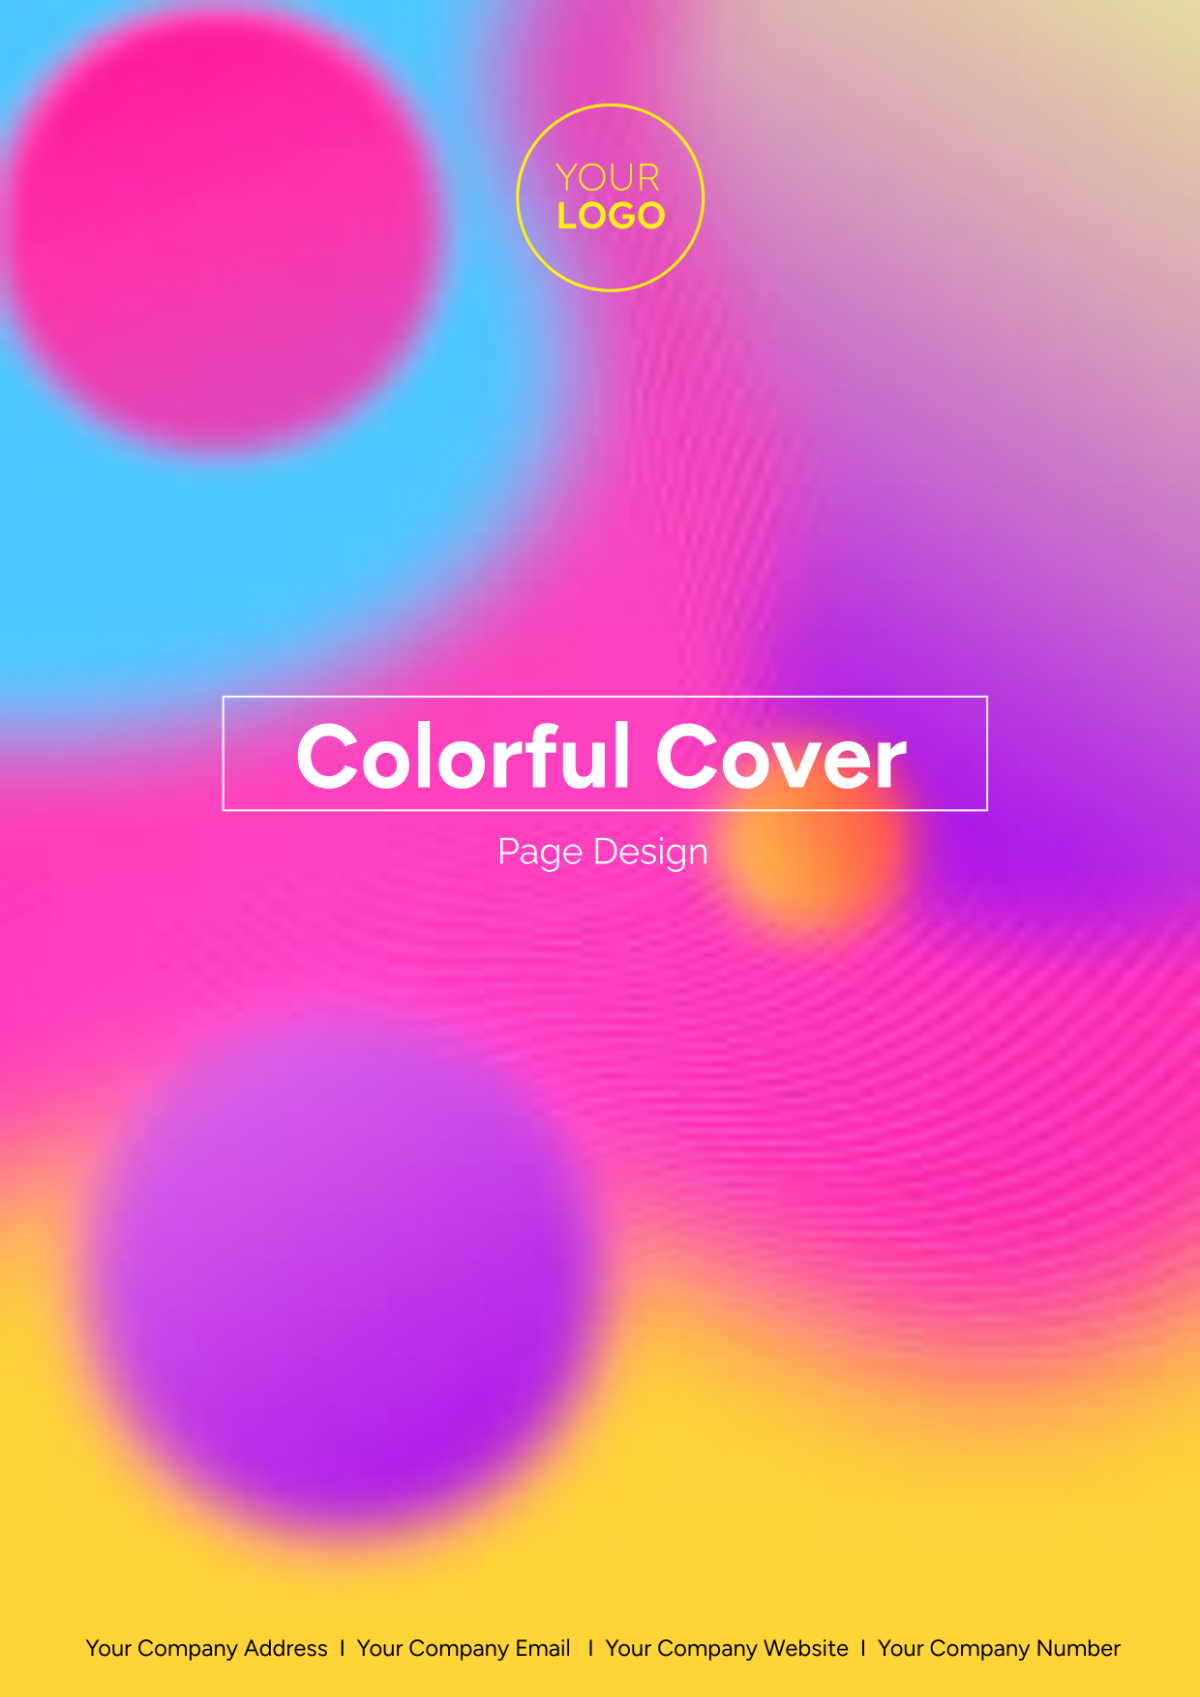 Colorful Cover Page Design